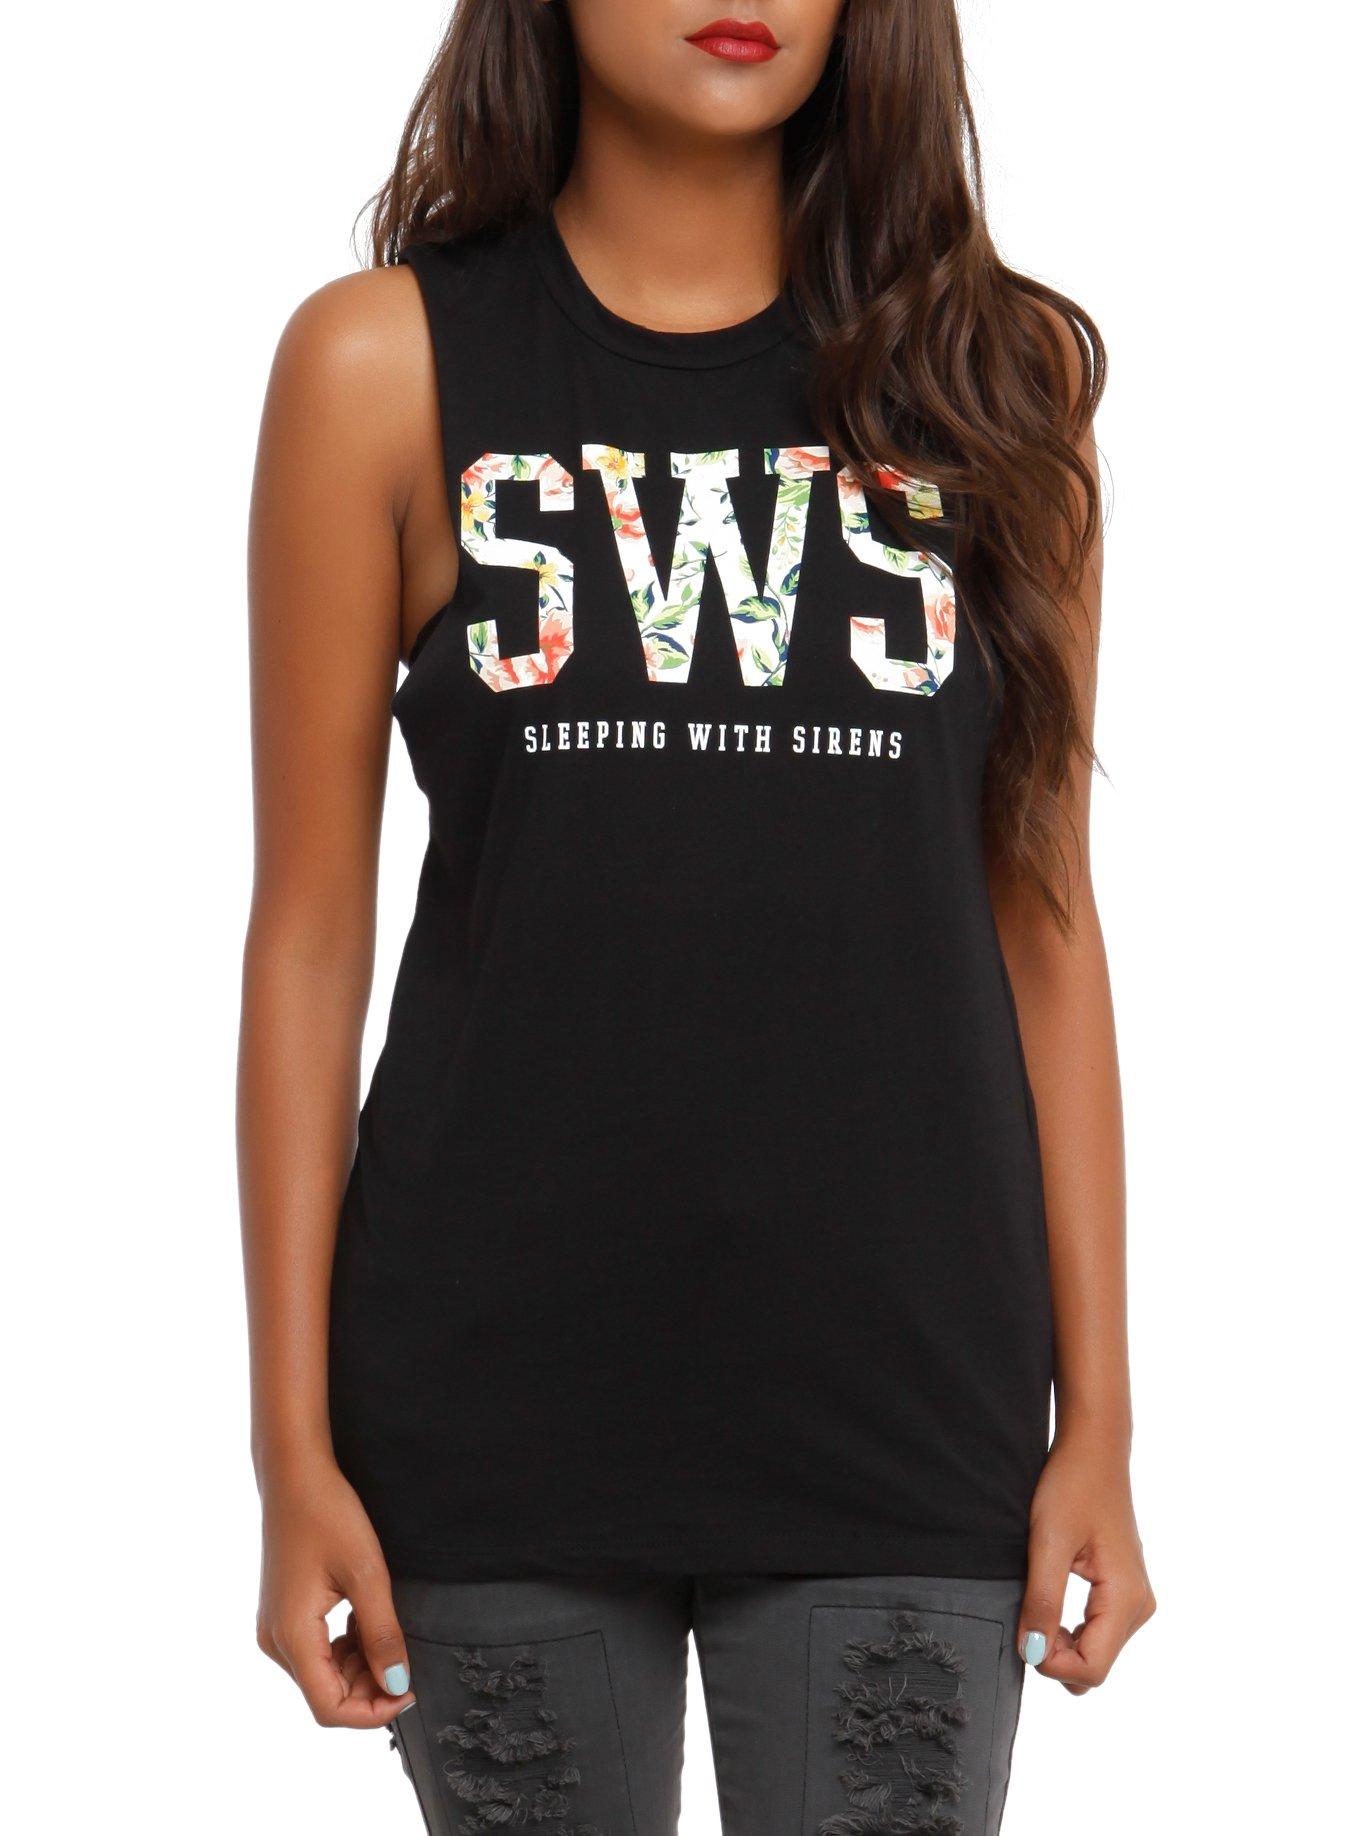 Sleeping With Sirens SWS Floral Muscle Girls Top, BLACK, hi-res